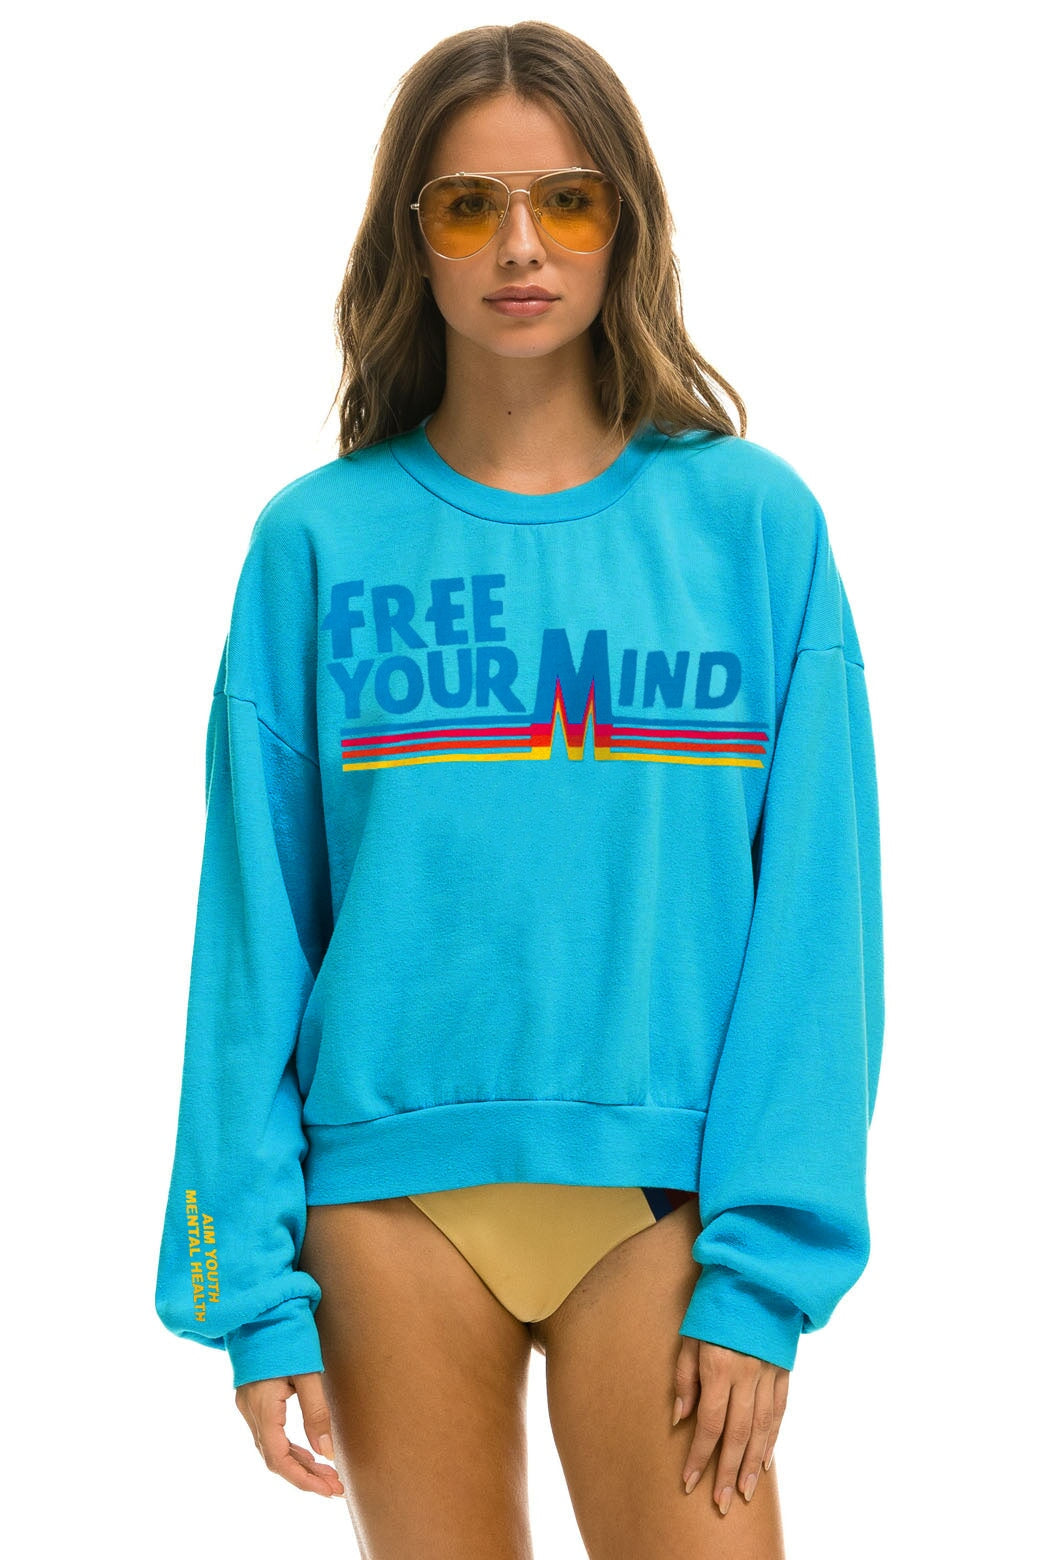 AVIATOR NATION + AIM YOUTH MENTAL HEALTH RELAXED SWEATSHIRT - NEON BLUE Sweatshirt Aviator Nation 